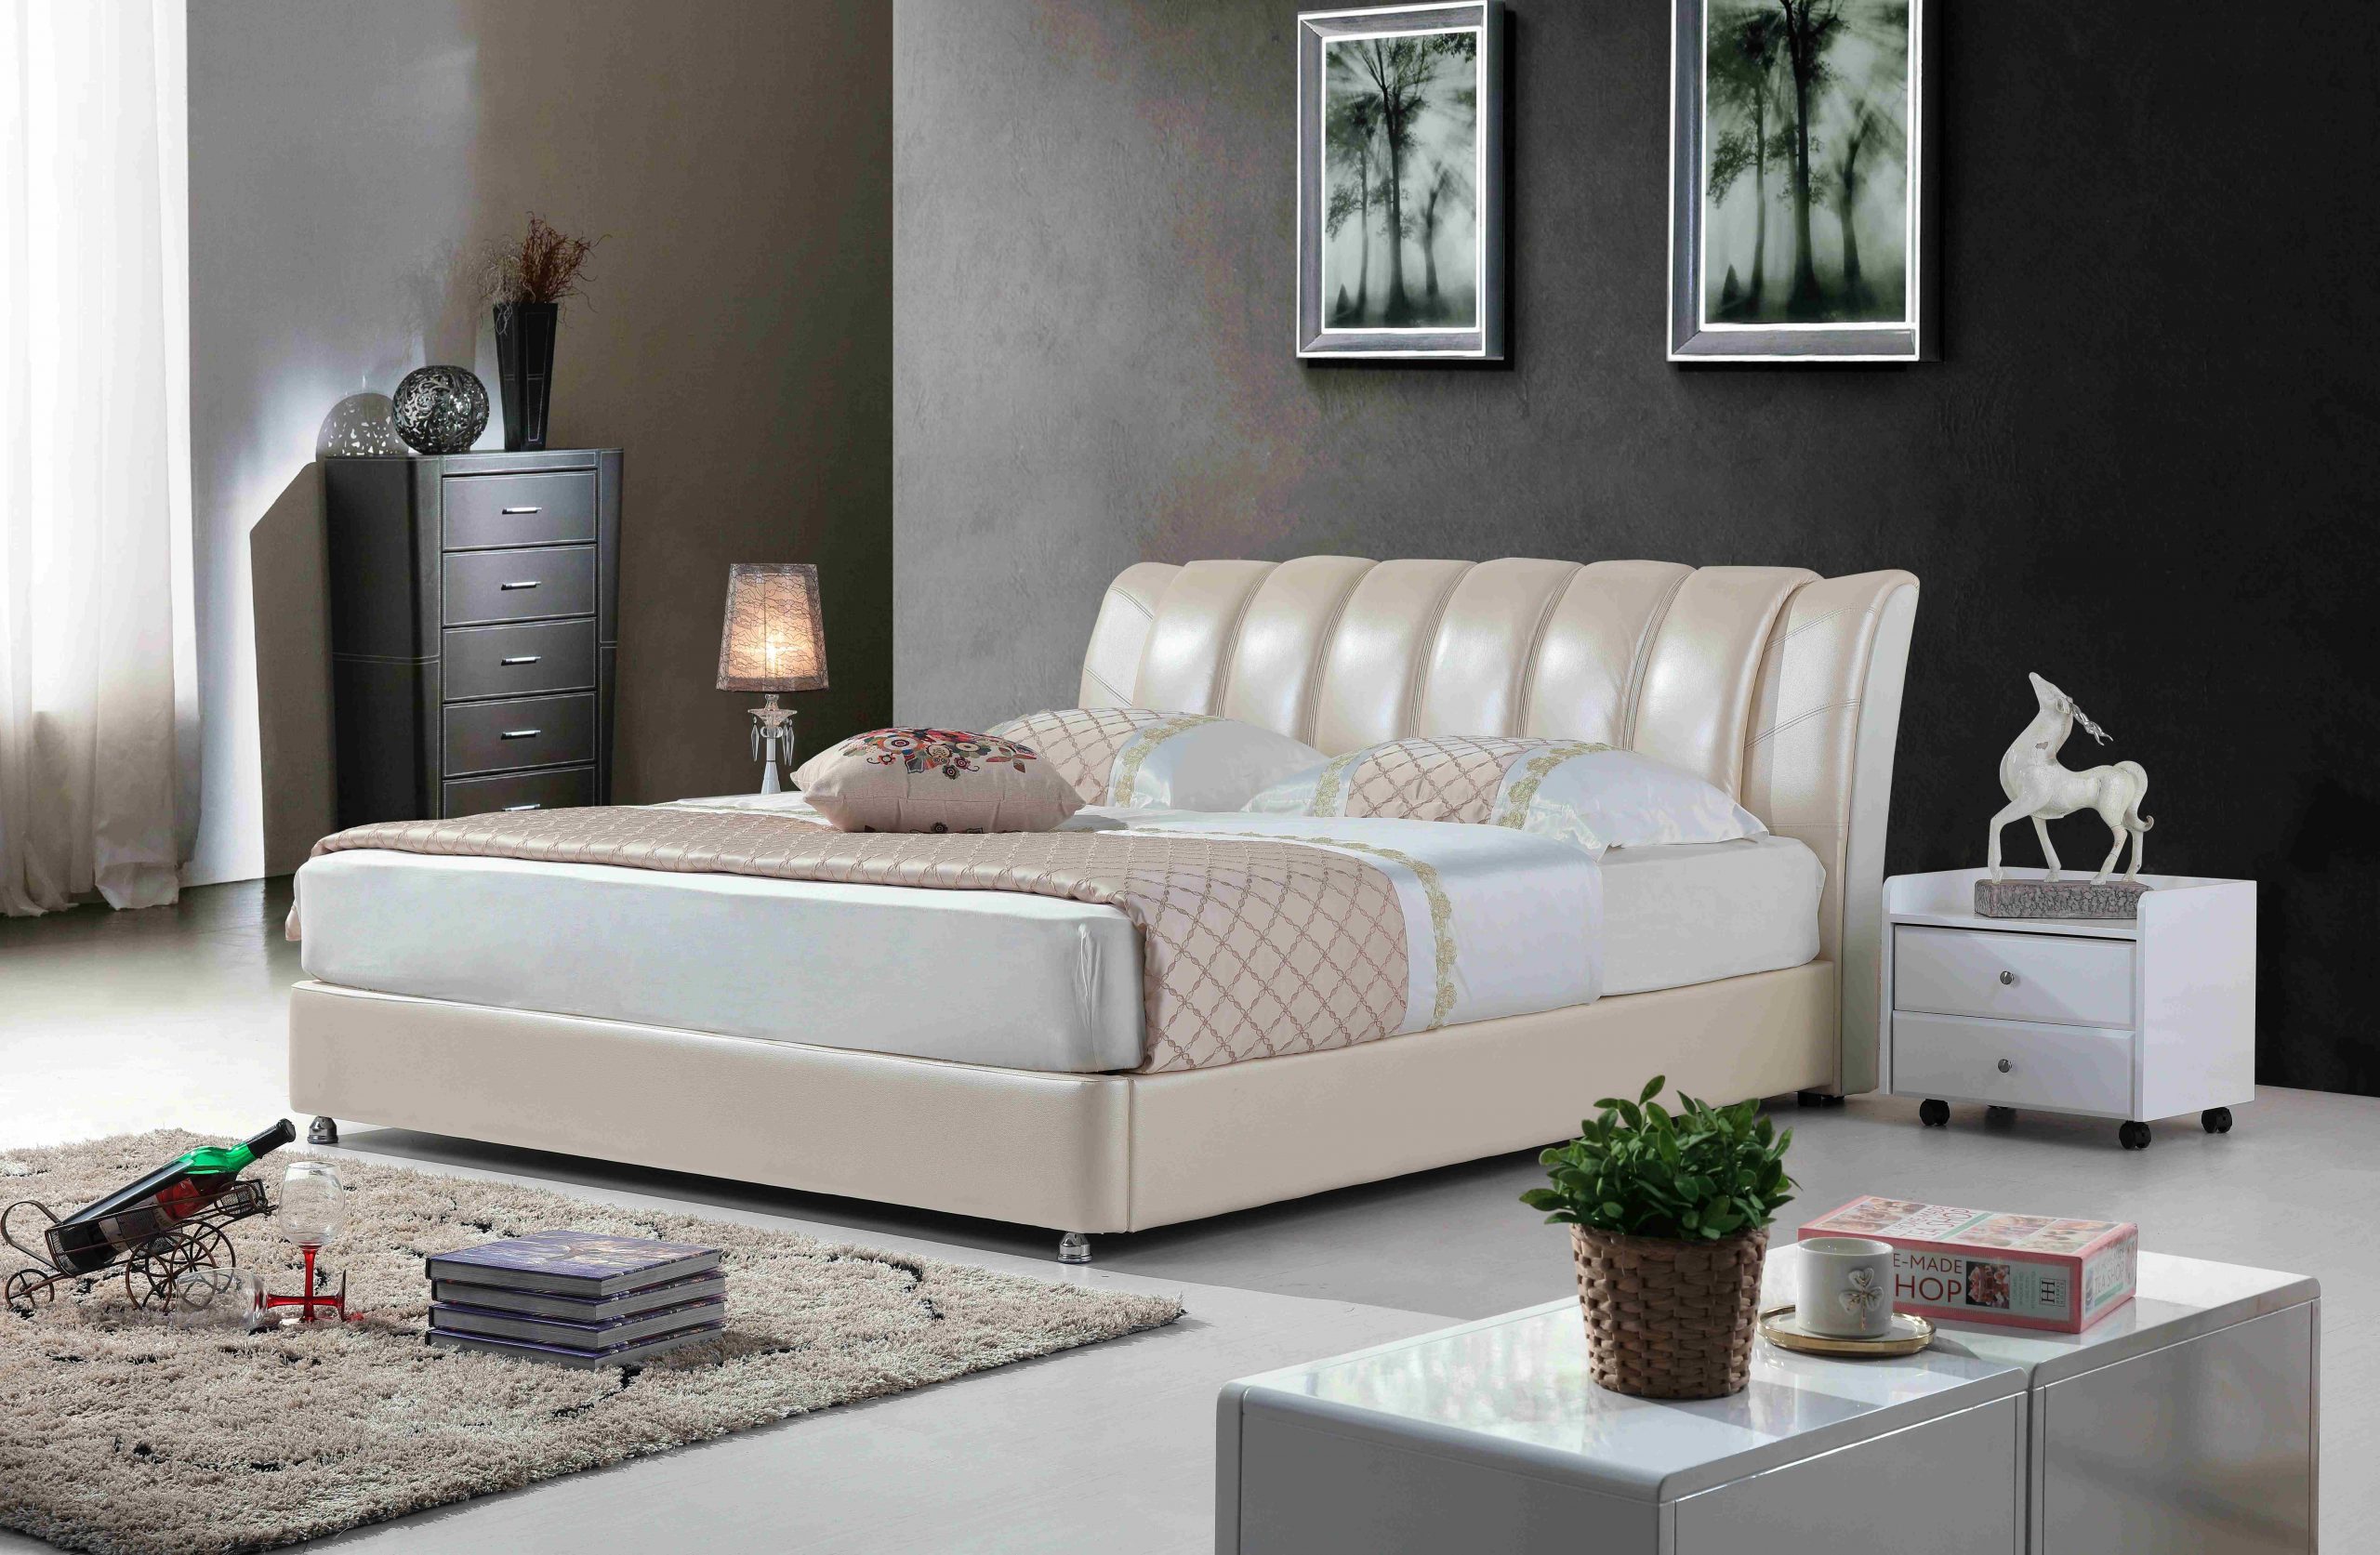 A8635-high quality upholstered leather king bed made by china luxury and modern furniture factory and company-furbyme